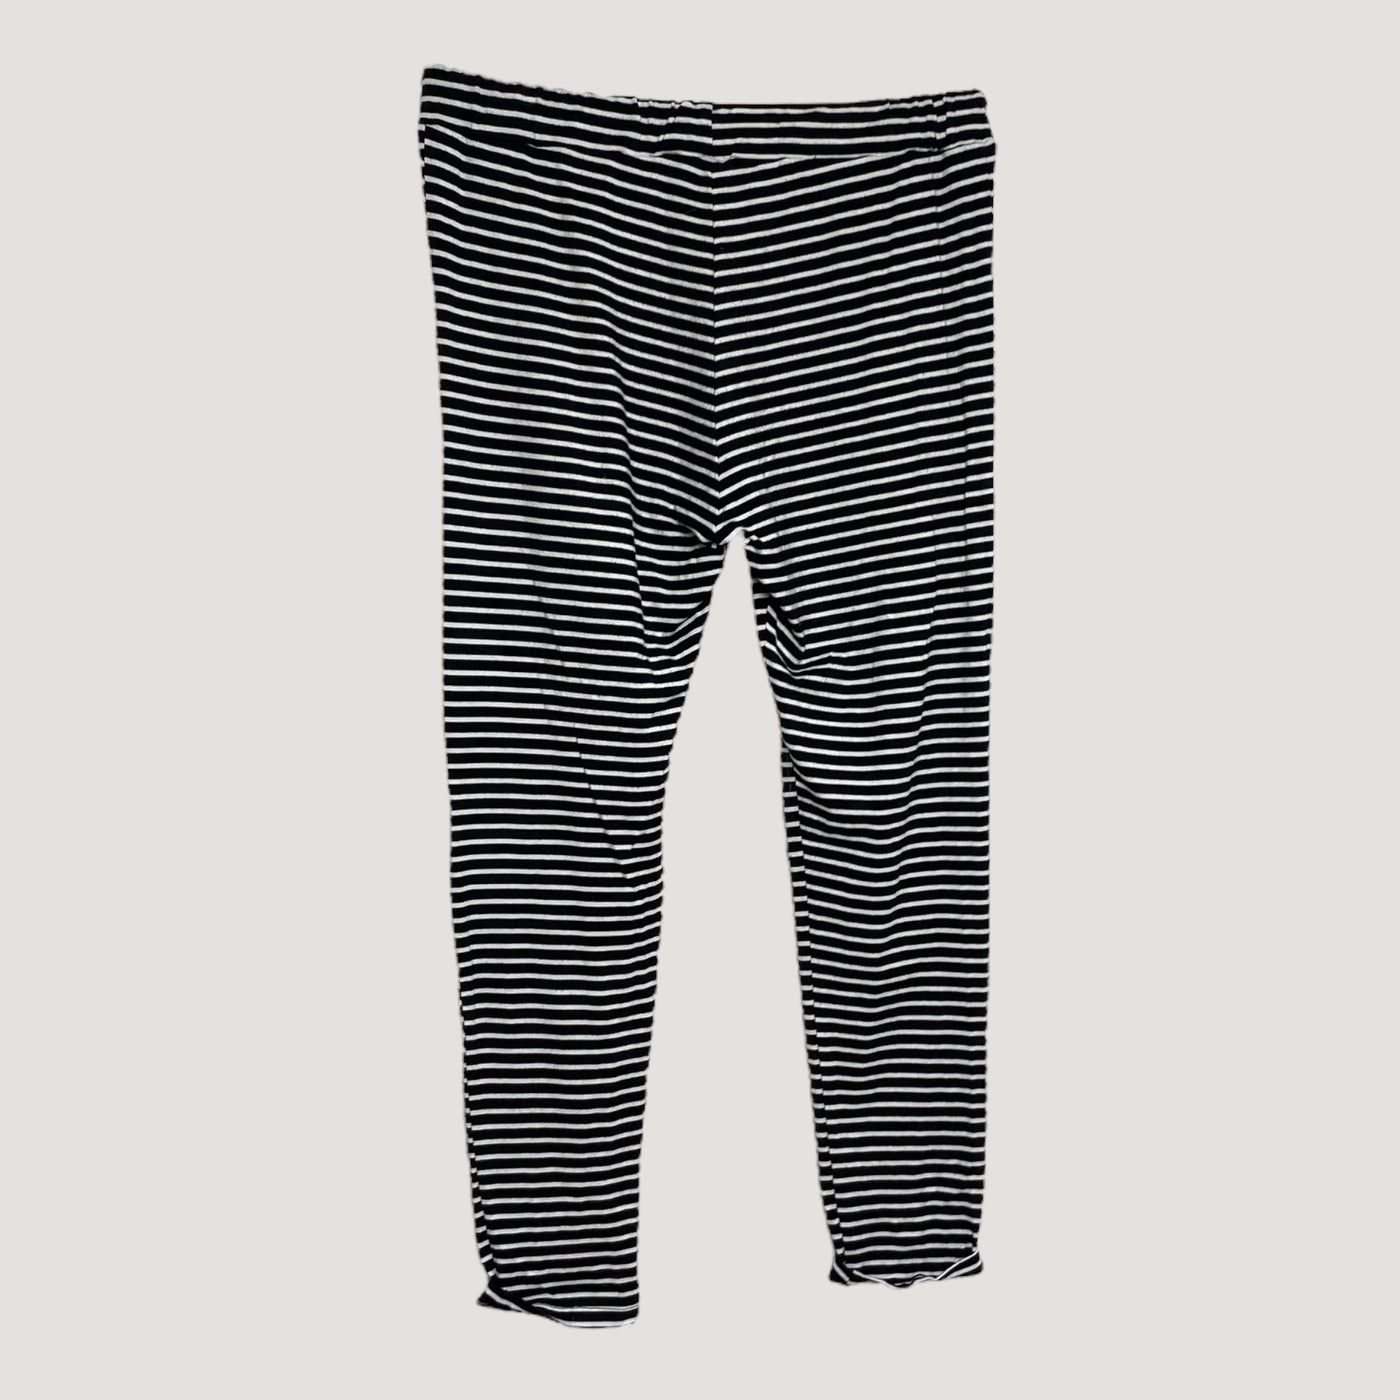 Bypias tricot pants, striped⎟S